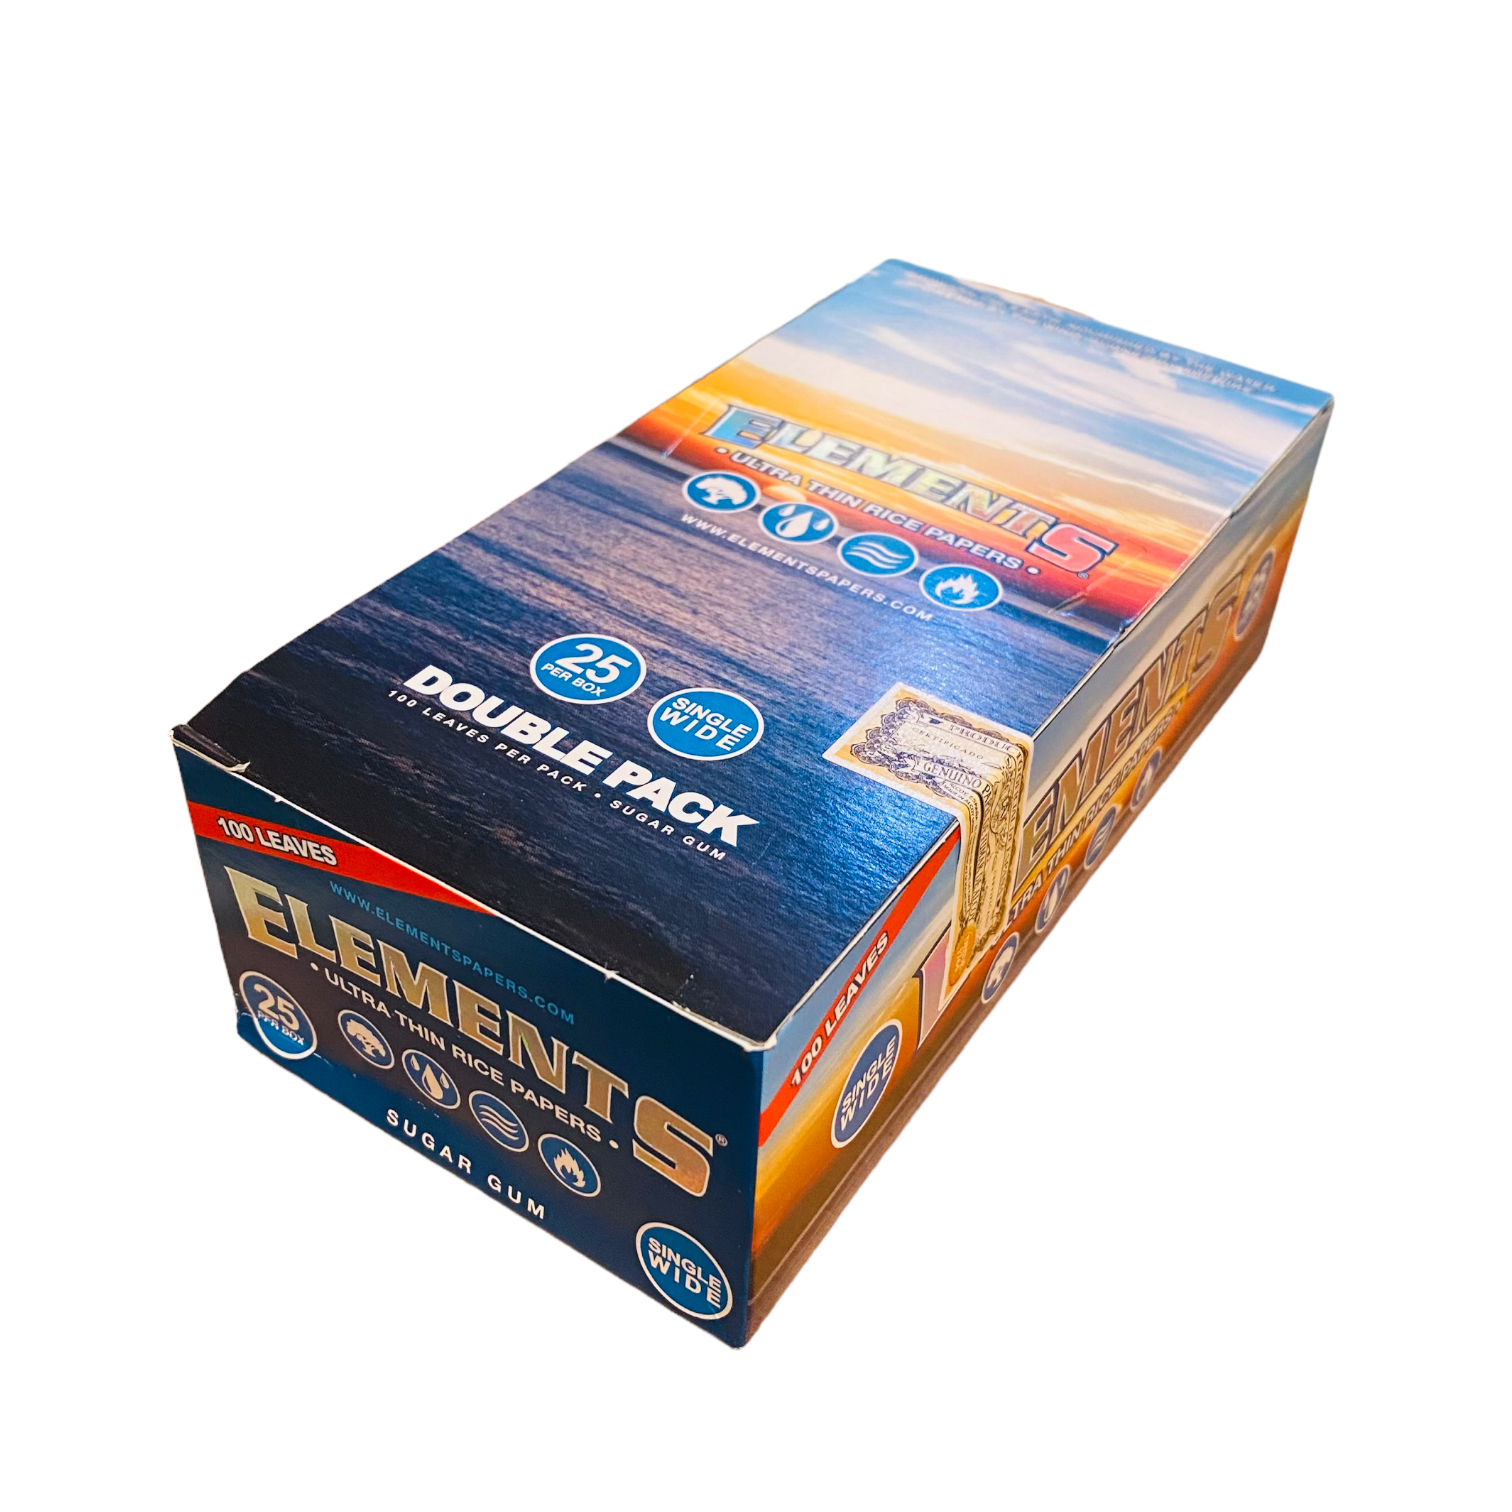 ELEMENTS 25 Pack 1 Box Elements 1 1/4 (1.25) Rolling Paper Ultra Thin Rice